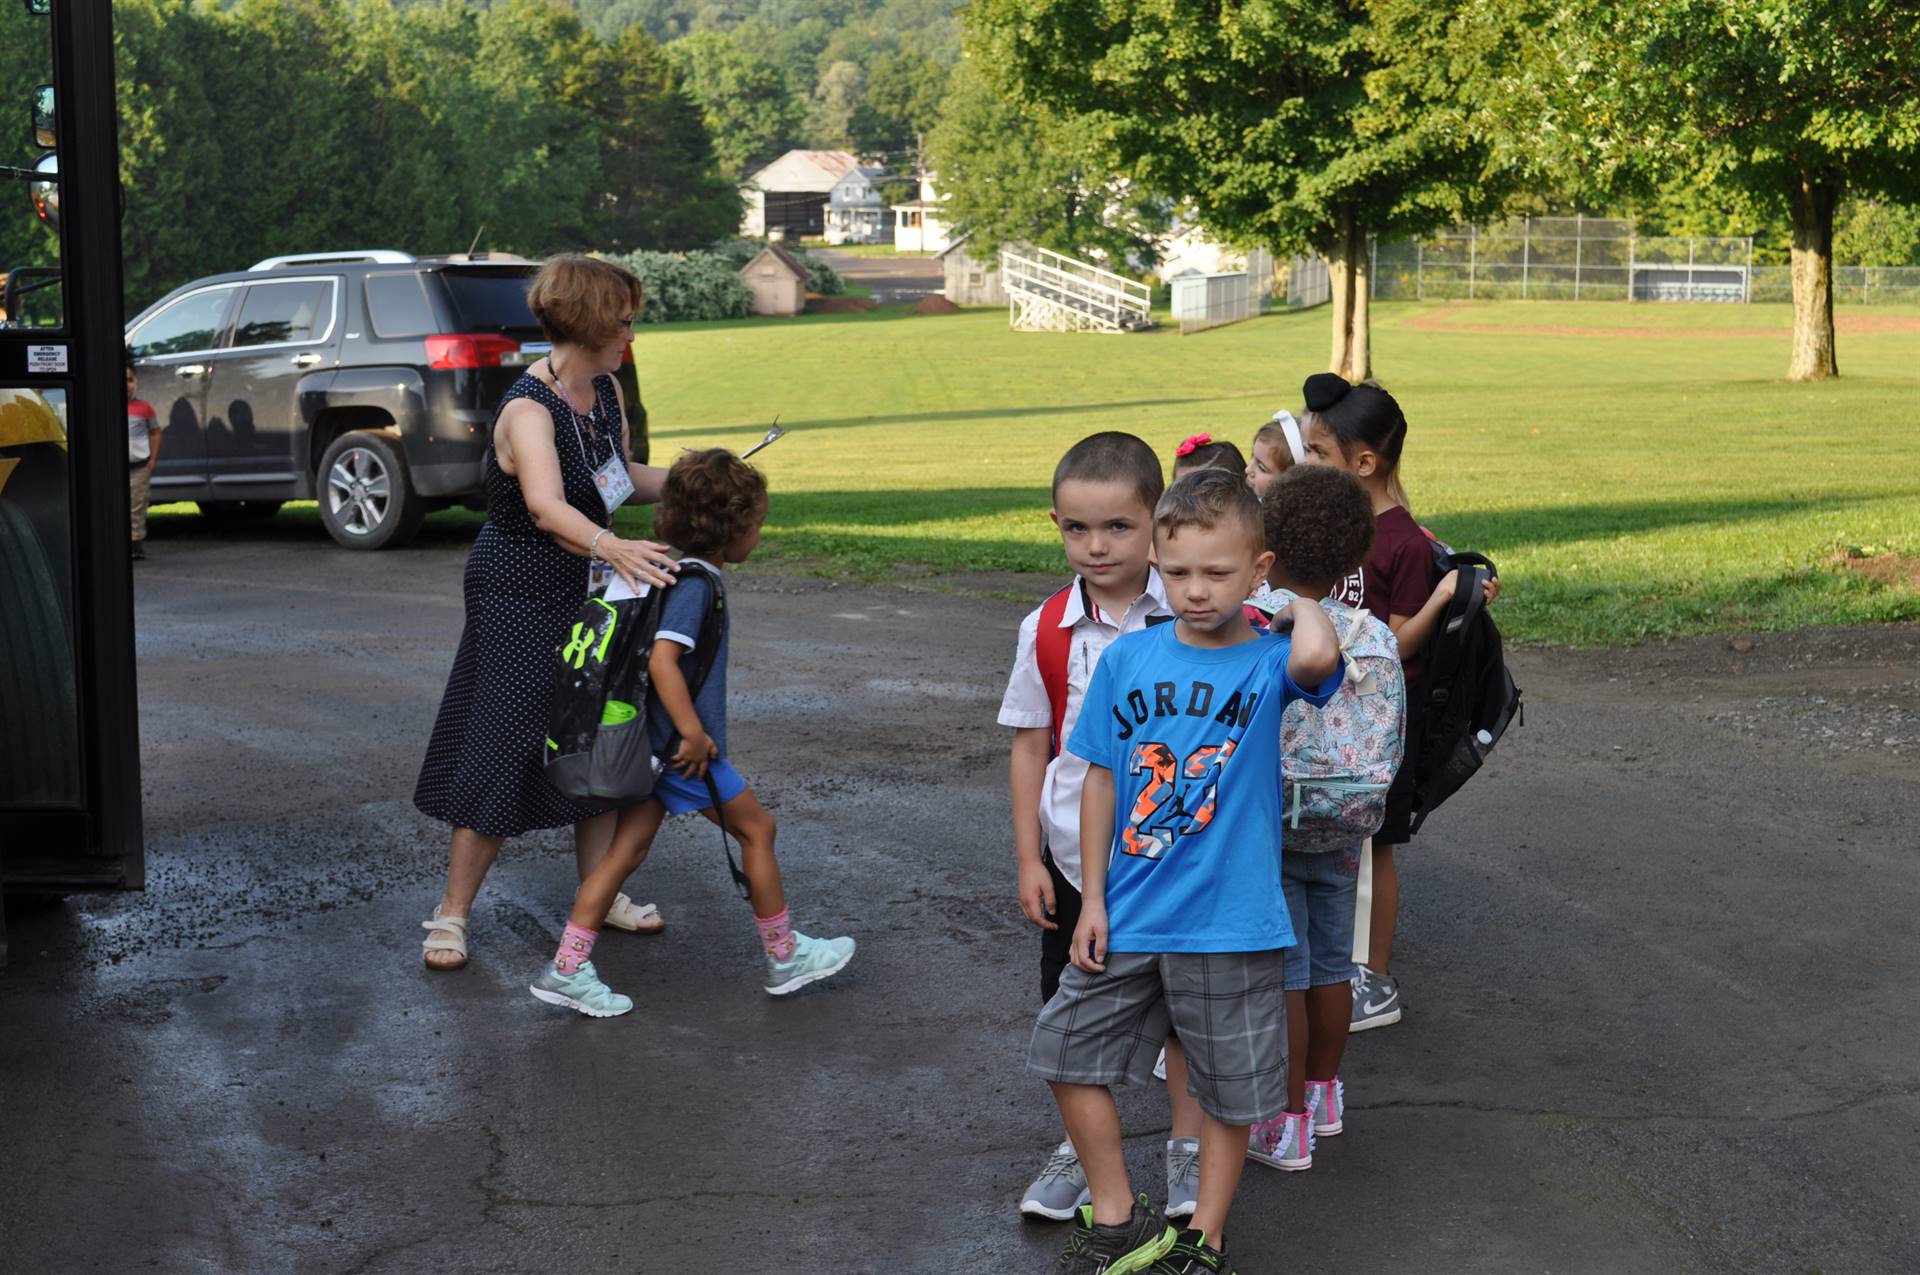 First graders and teachers lined up and ready for school!